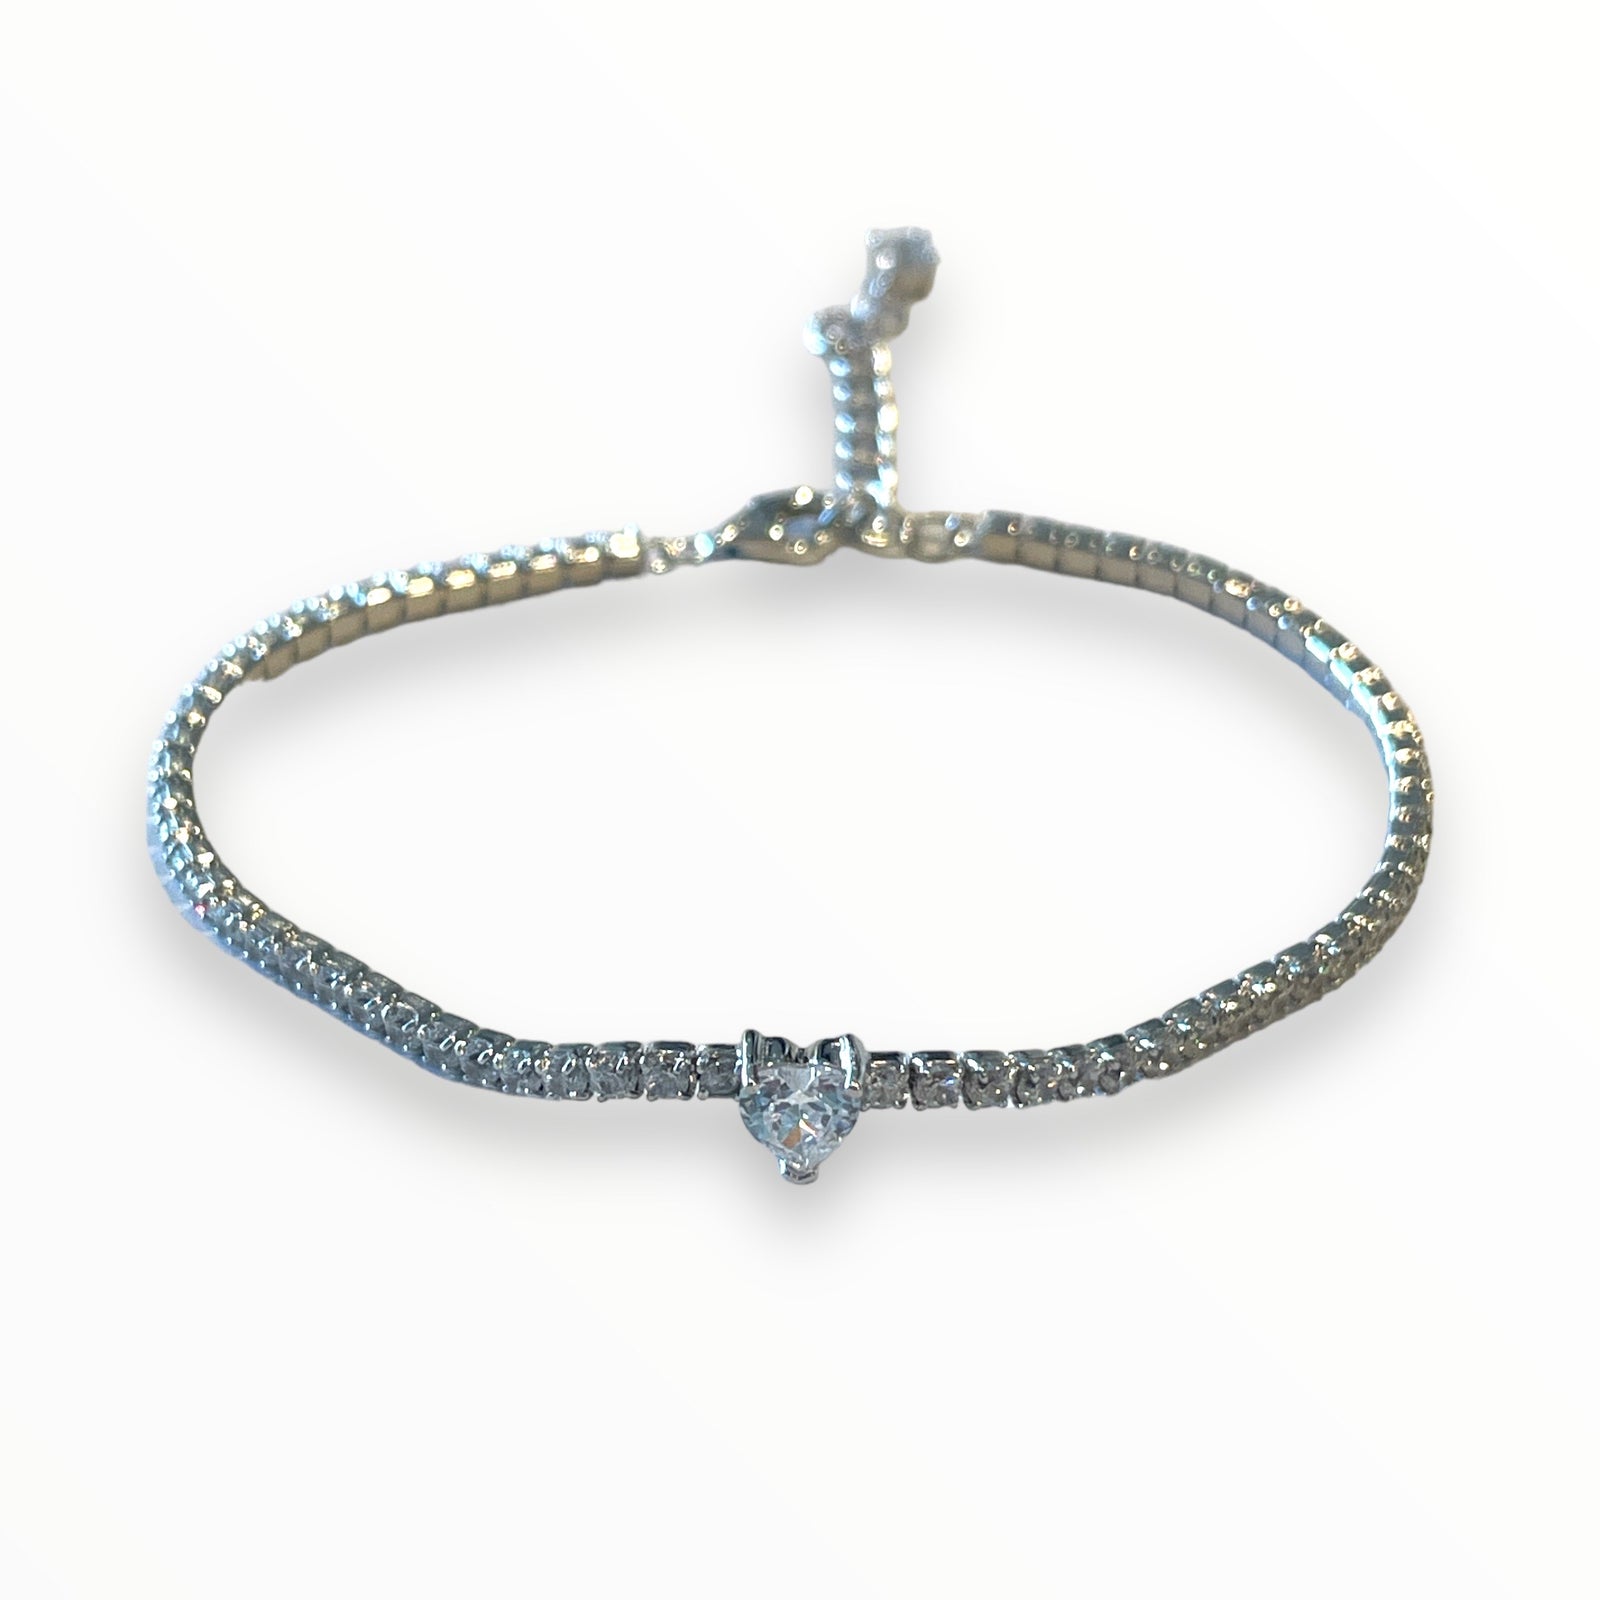 Thin tennis bracelet with heart